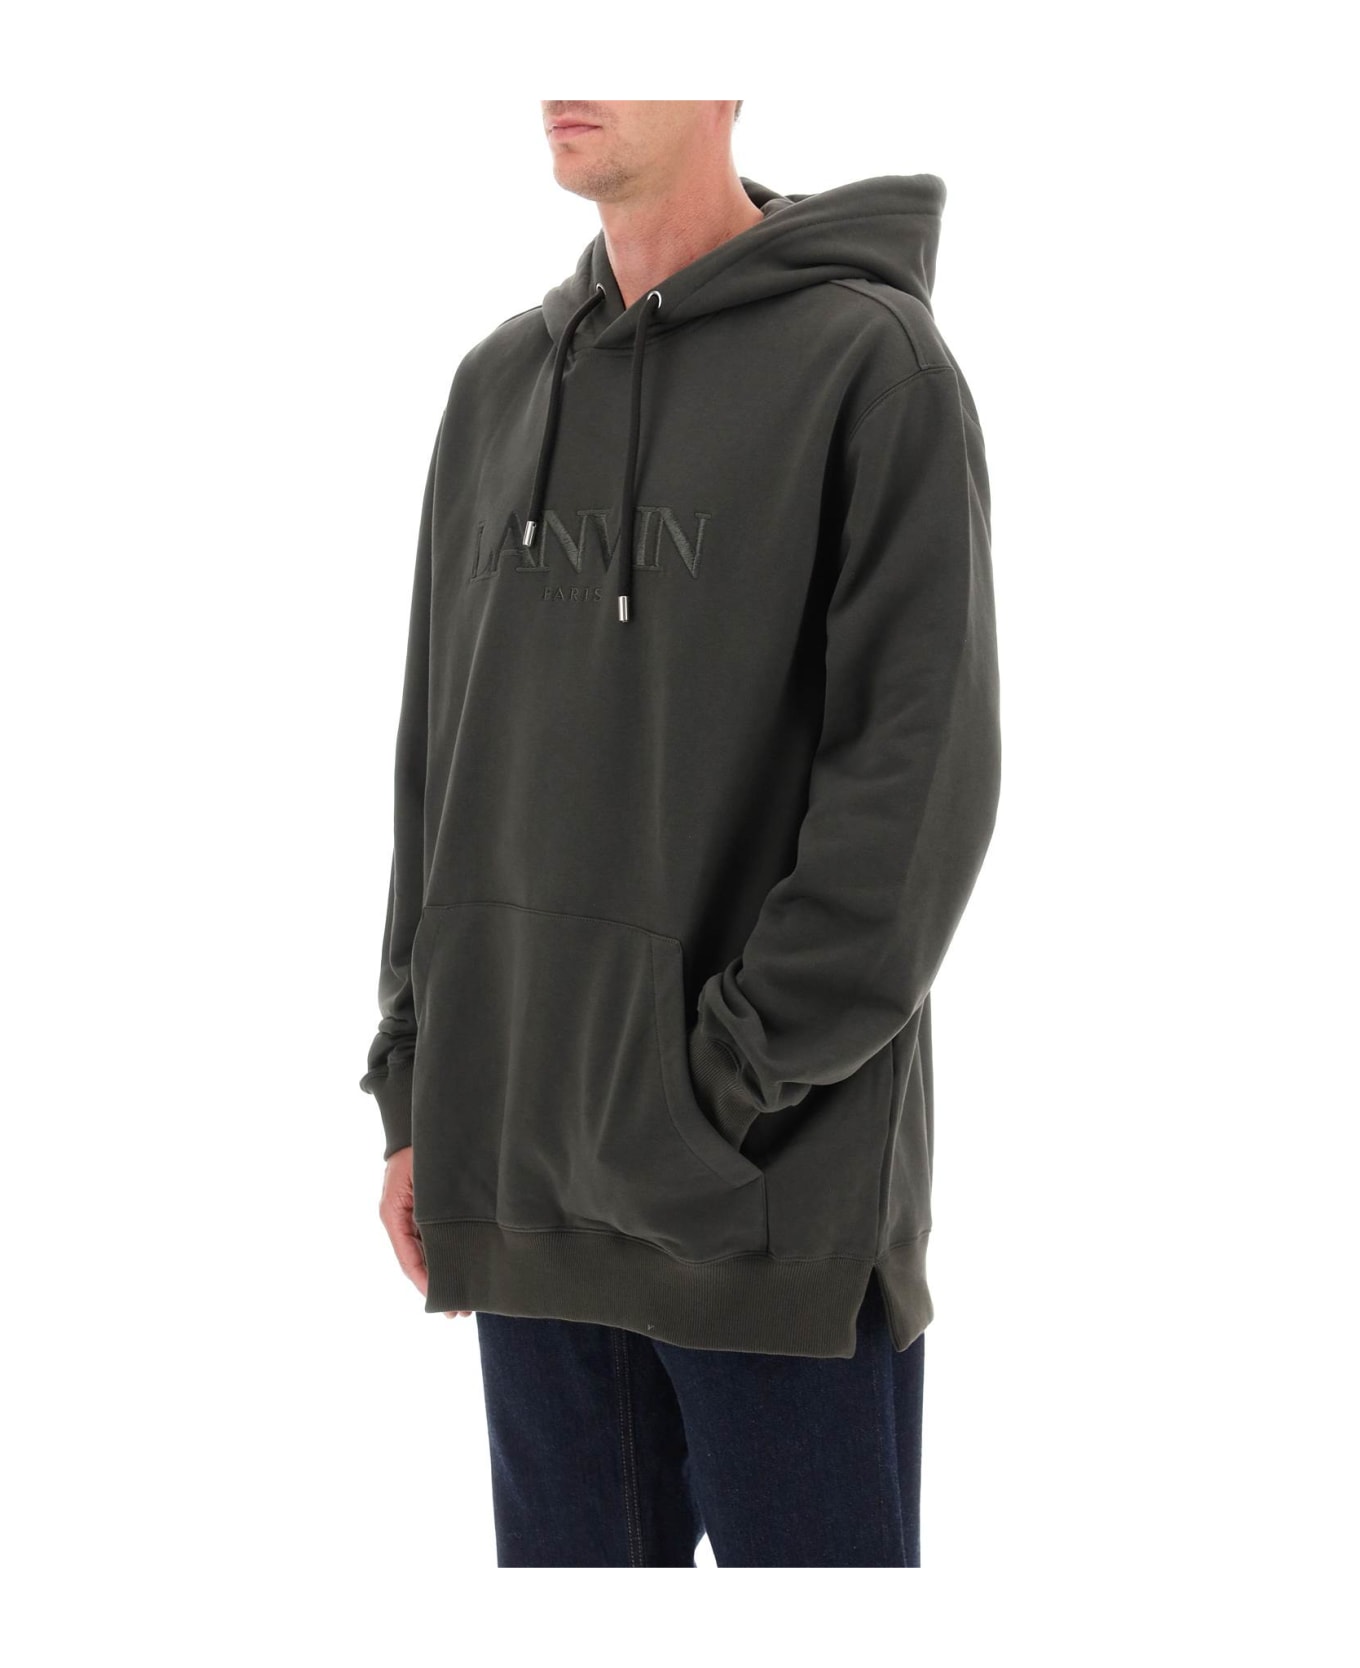 Lanvin Hoodie With Curb Embroidery - GREY フリース